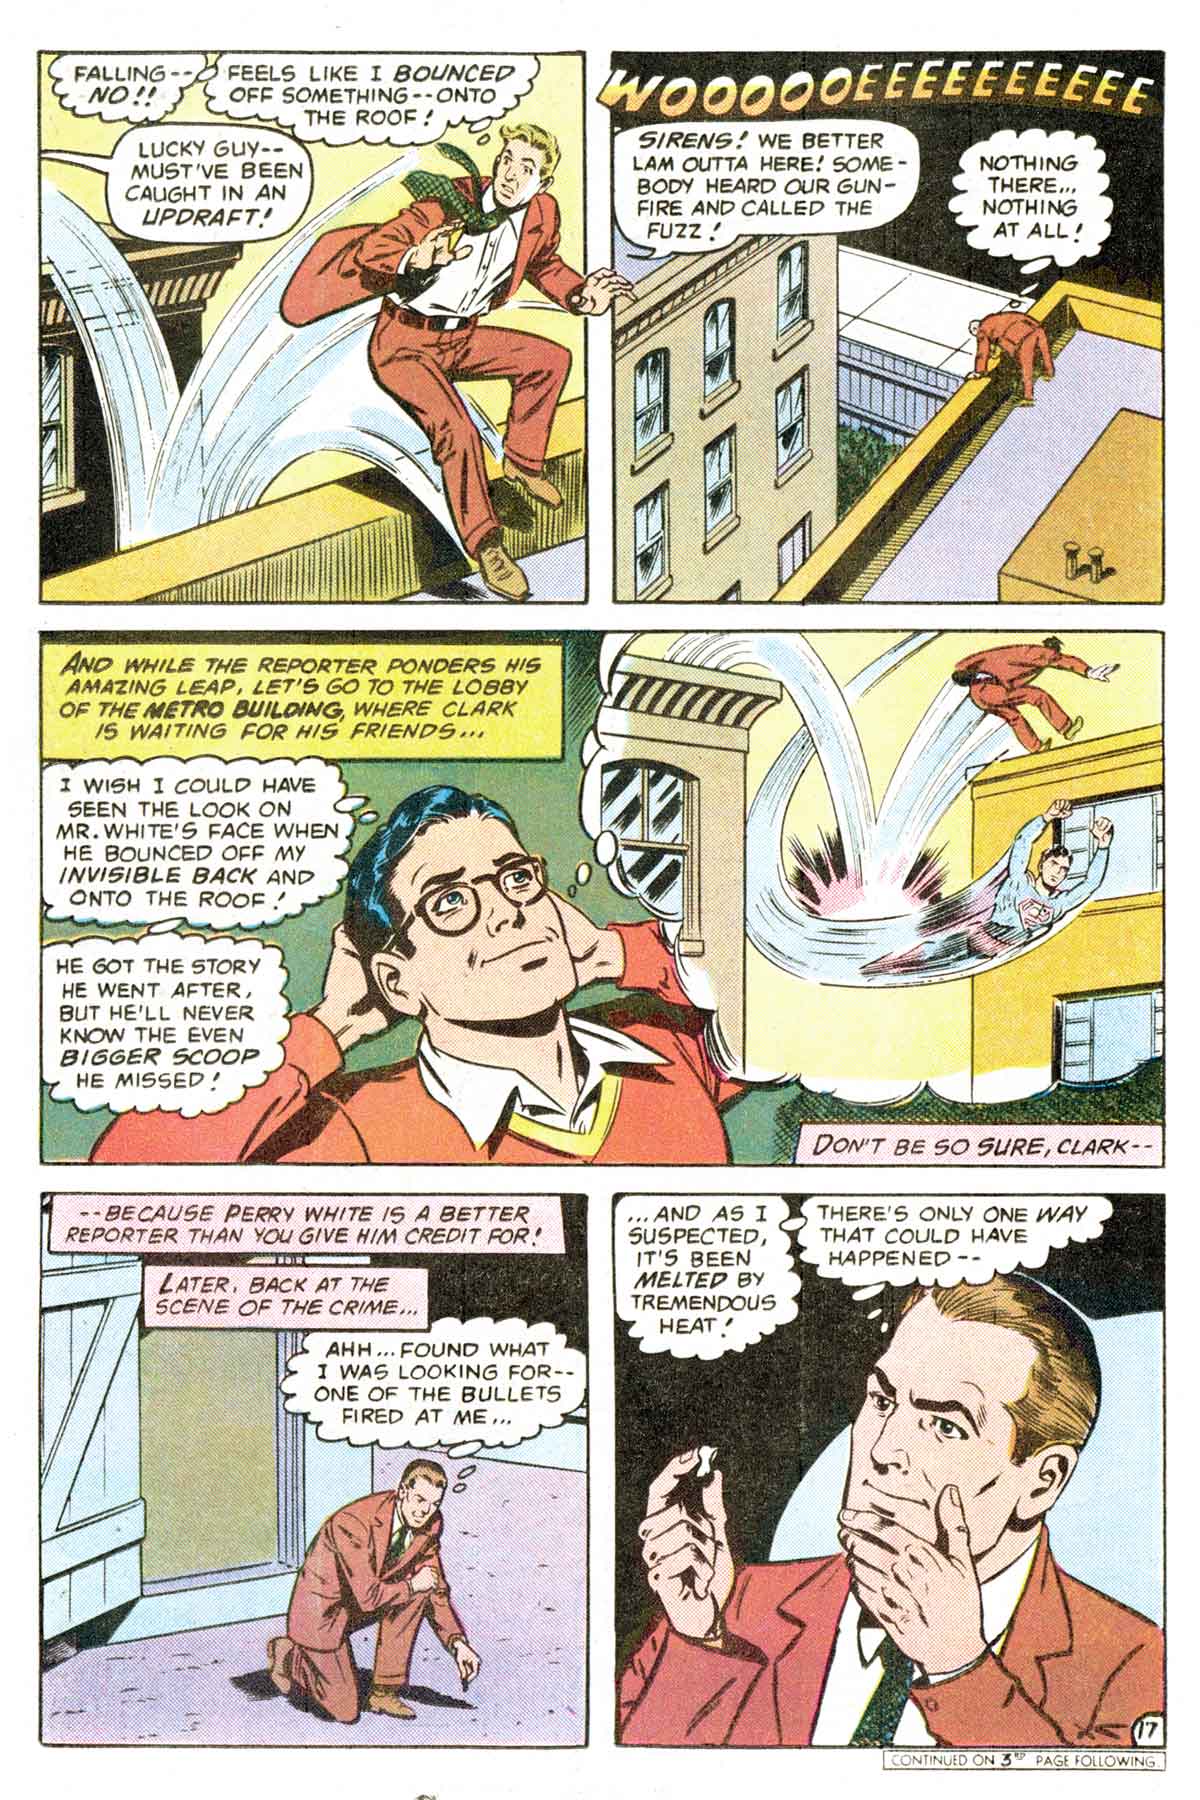 The New Adventures of Superboy 51 Page 17